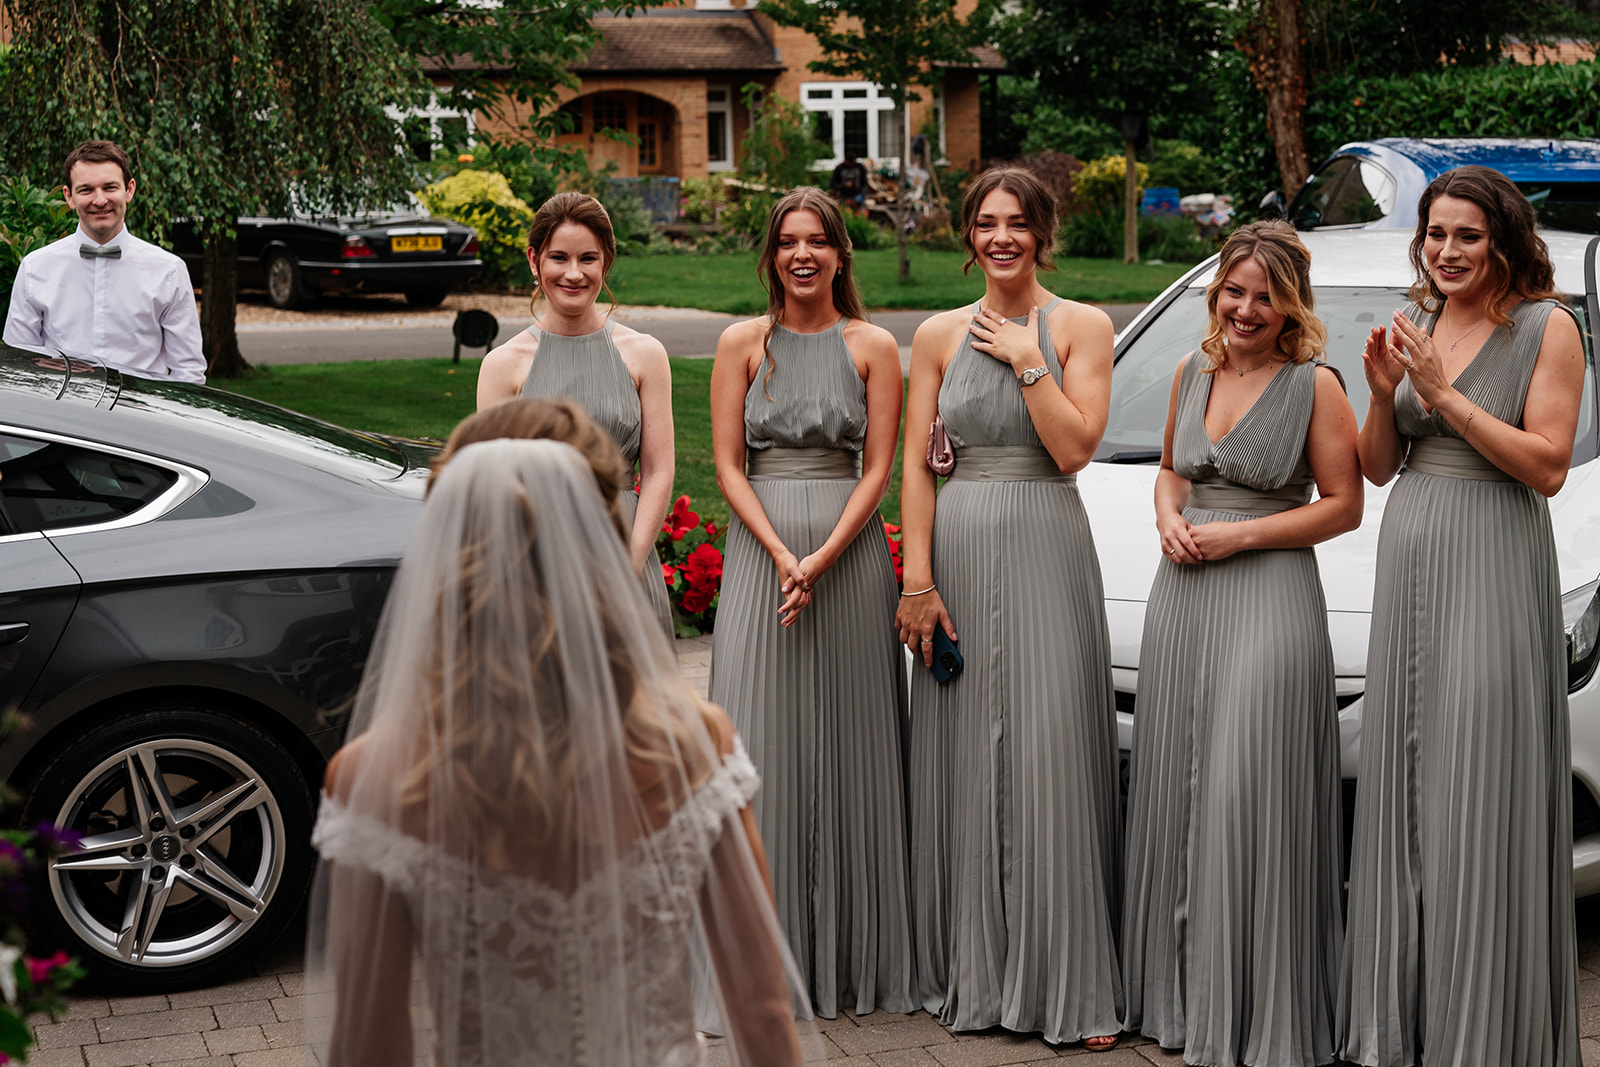 Bridesmaids seeing bride in her dress for the first time 